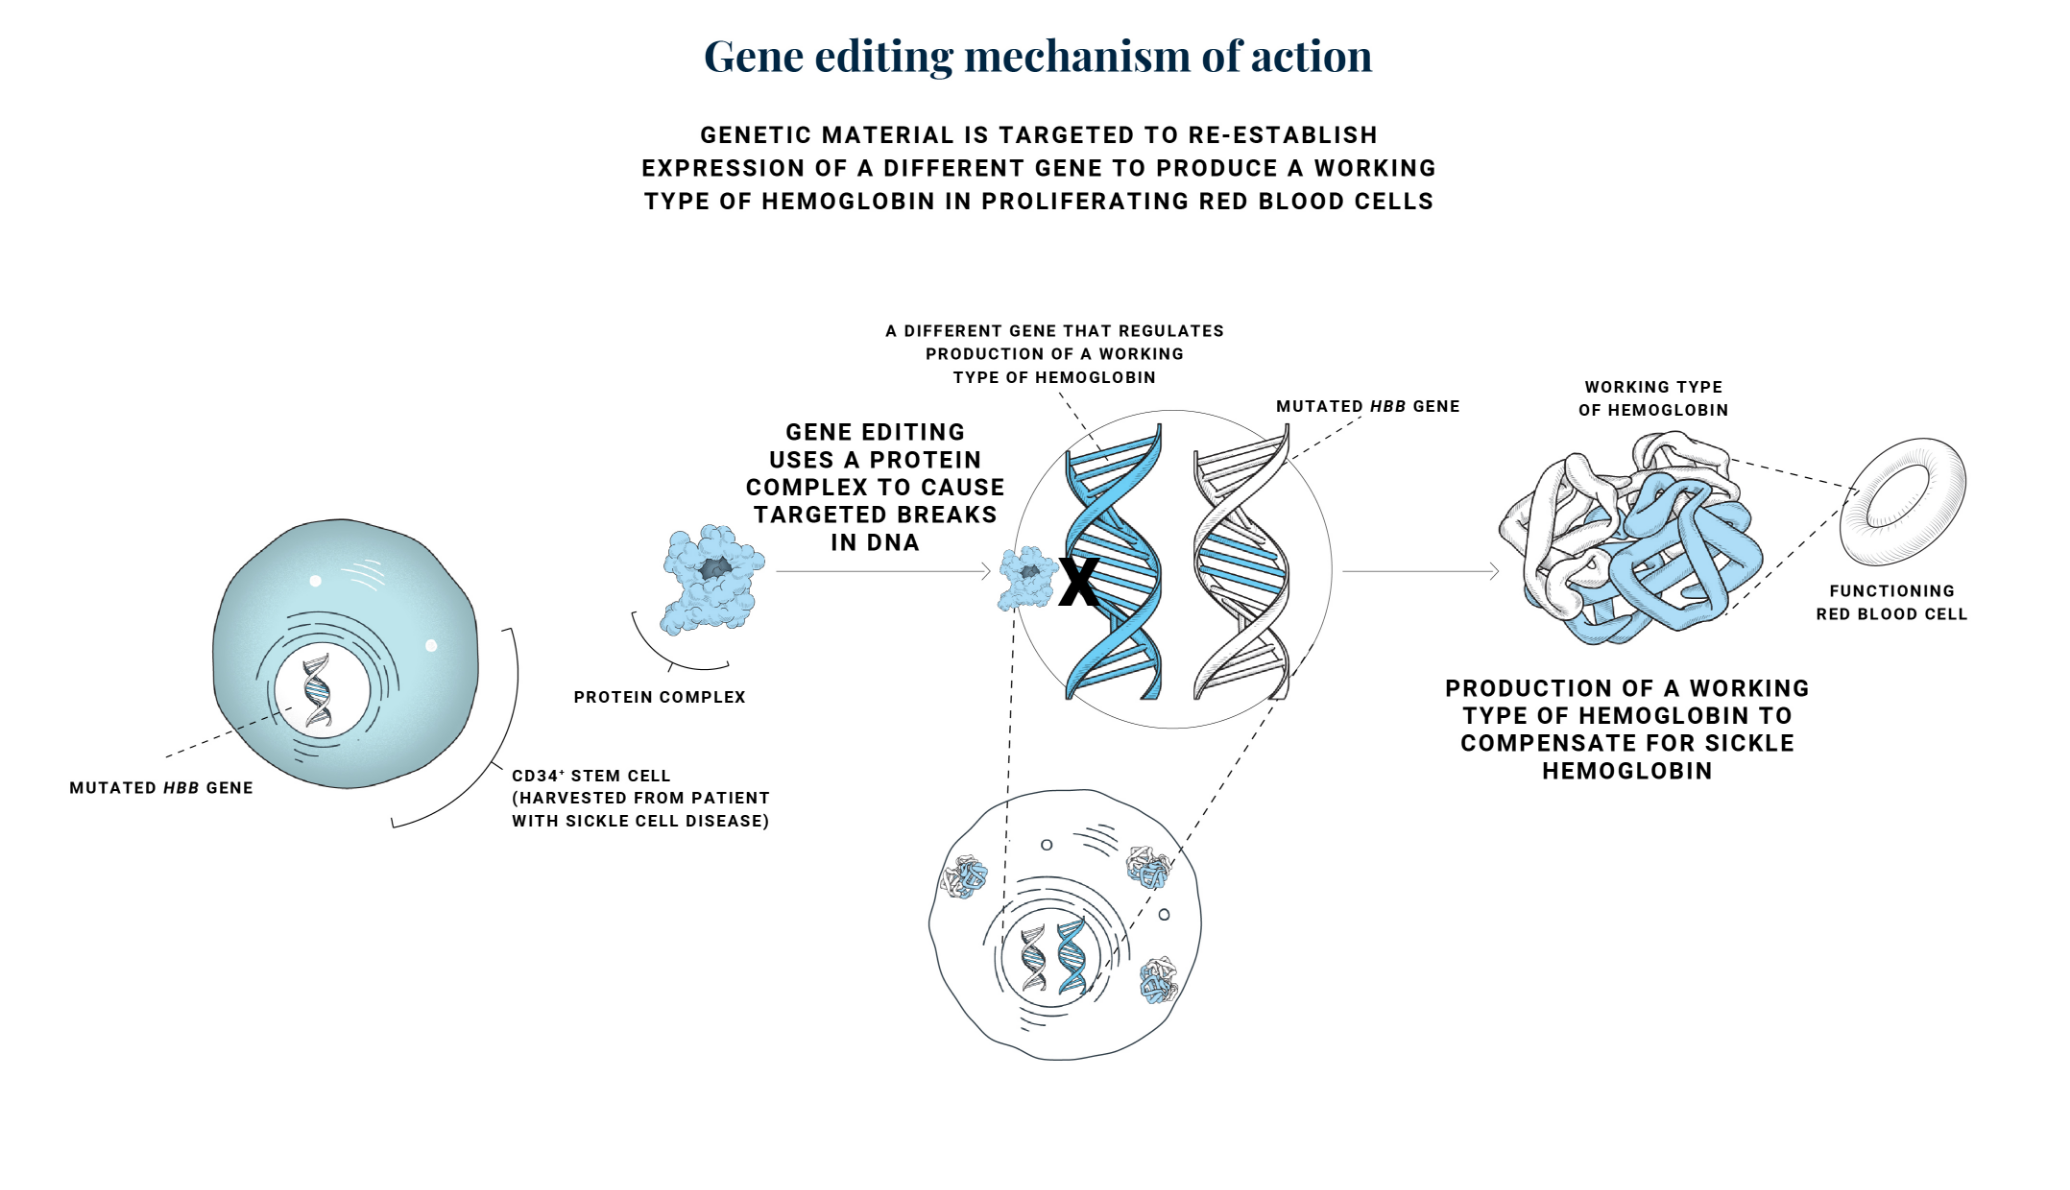 Gene editing mechanism of action for sickle cell disease